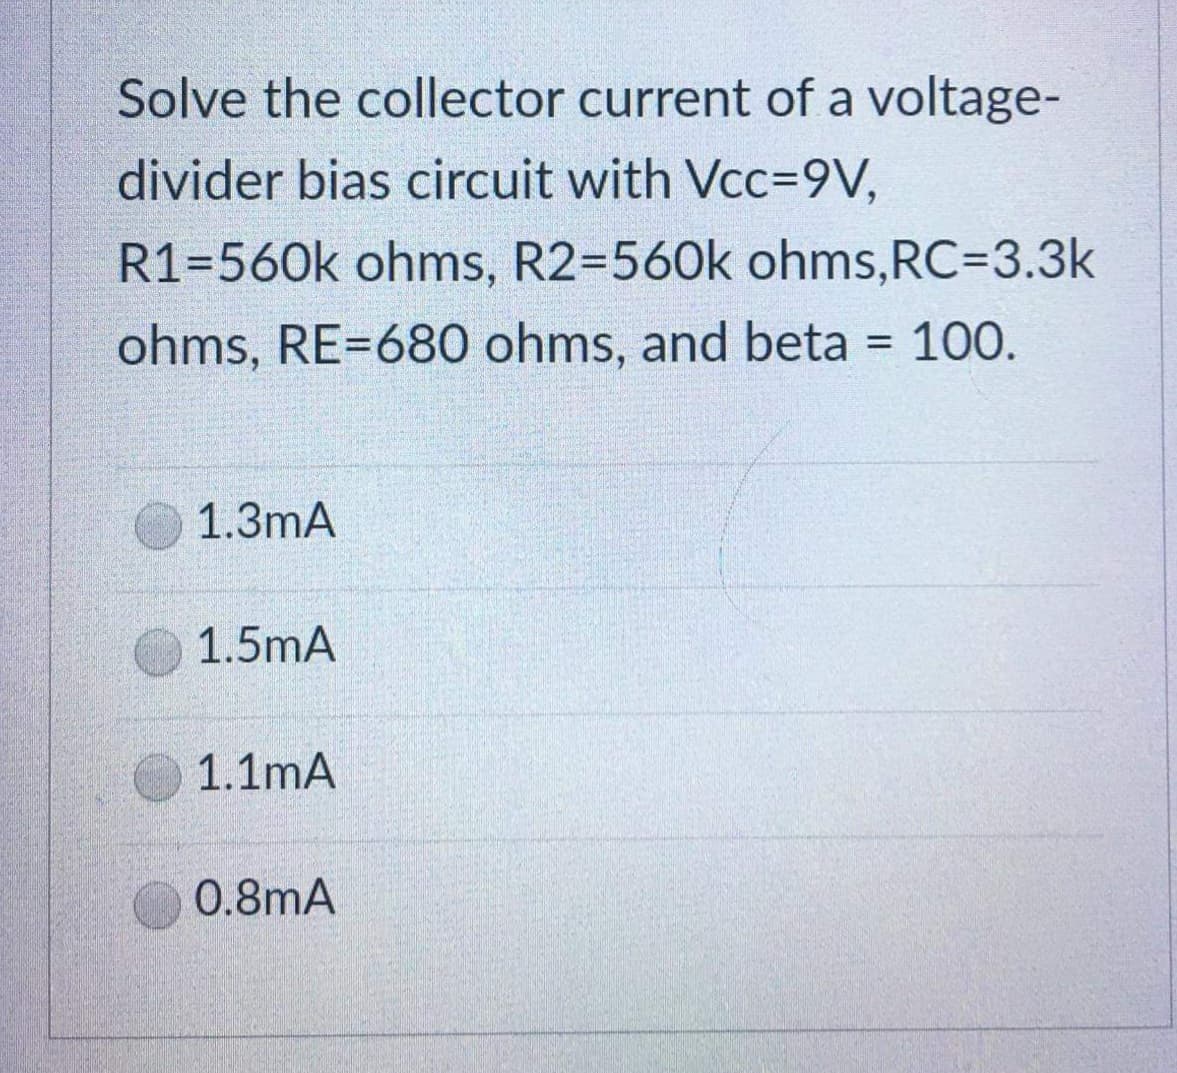 Solve the collector current of a voltage-
divider bias circuit with Vcc=9V,
R1=560k ohms, R2=560k ohms, RC=3.3k
ohms, RE=680 ohms, and beta = 100.
1.3mA
1.5mA
1.1mA
0.8mA